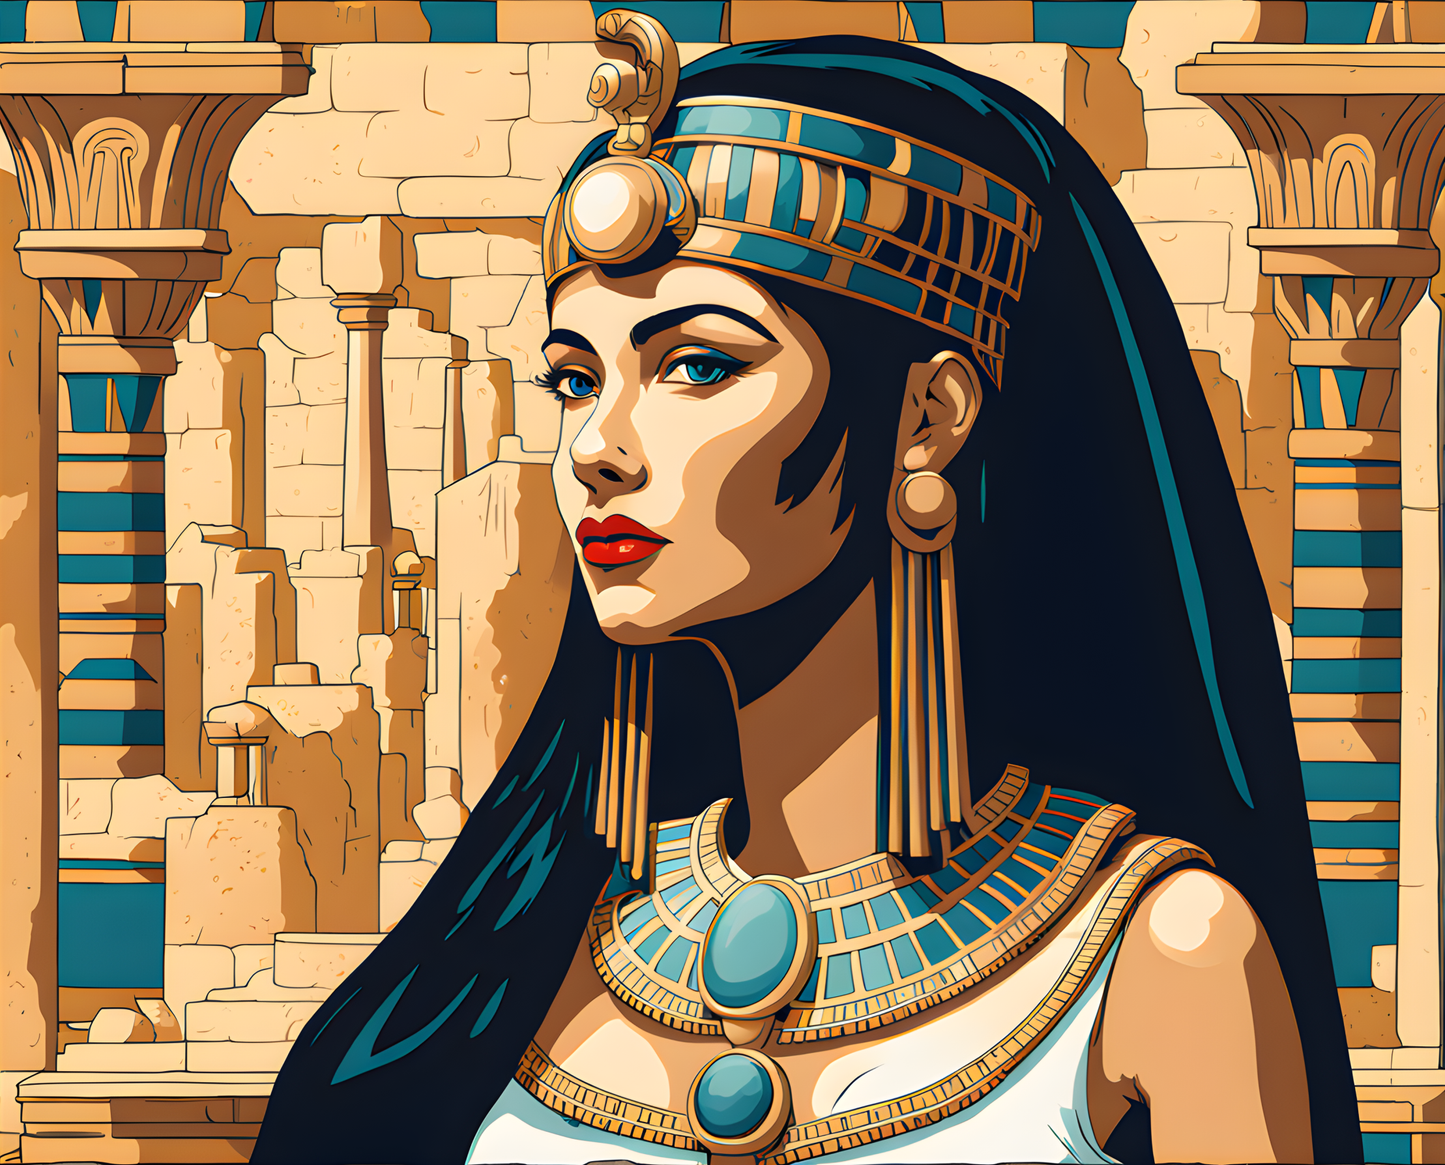 Street Art Collection OD (35) - Queen Cleopatra of Egypt - Van-Go Paint-By-Number Kit